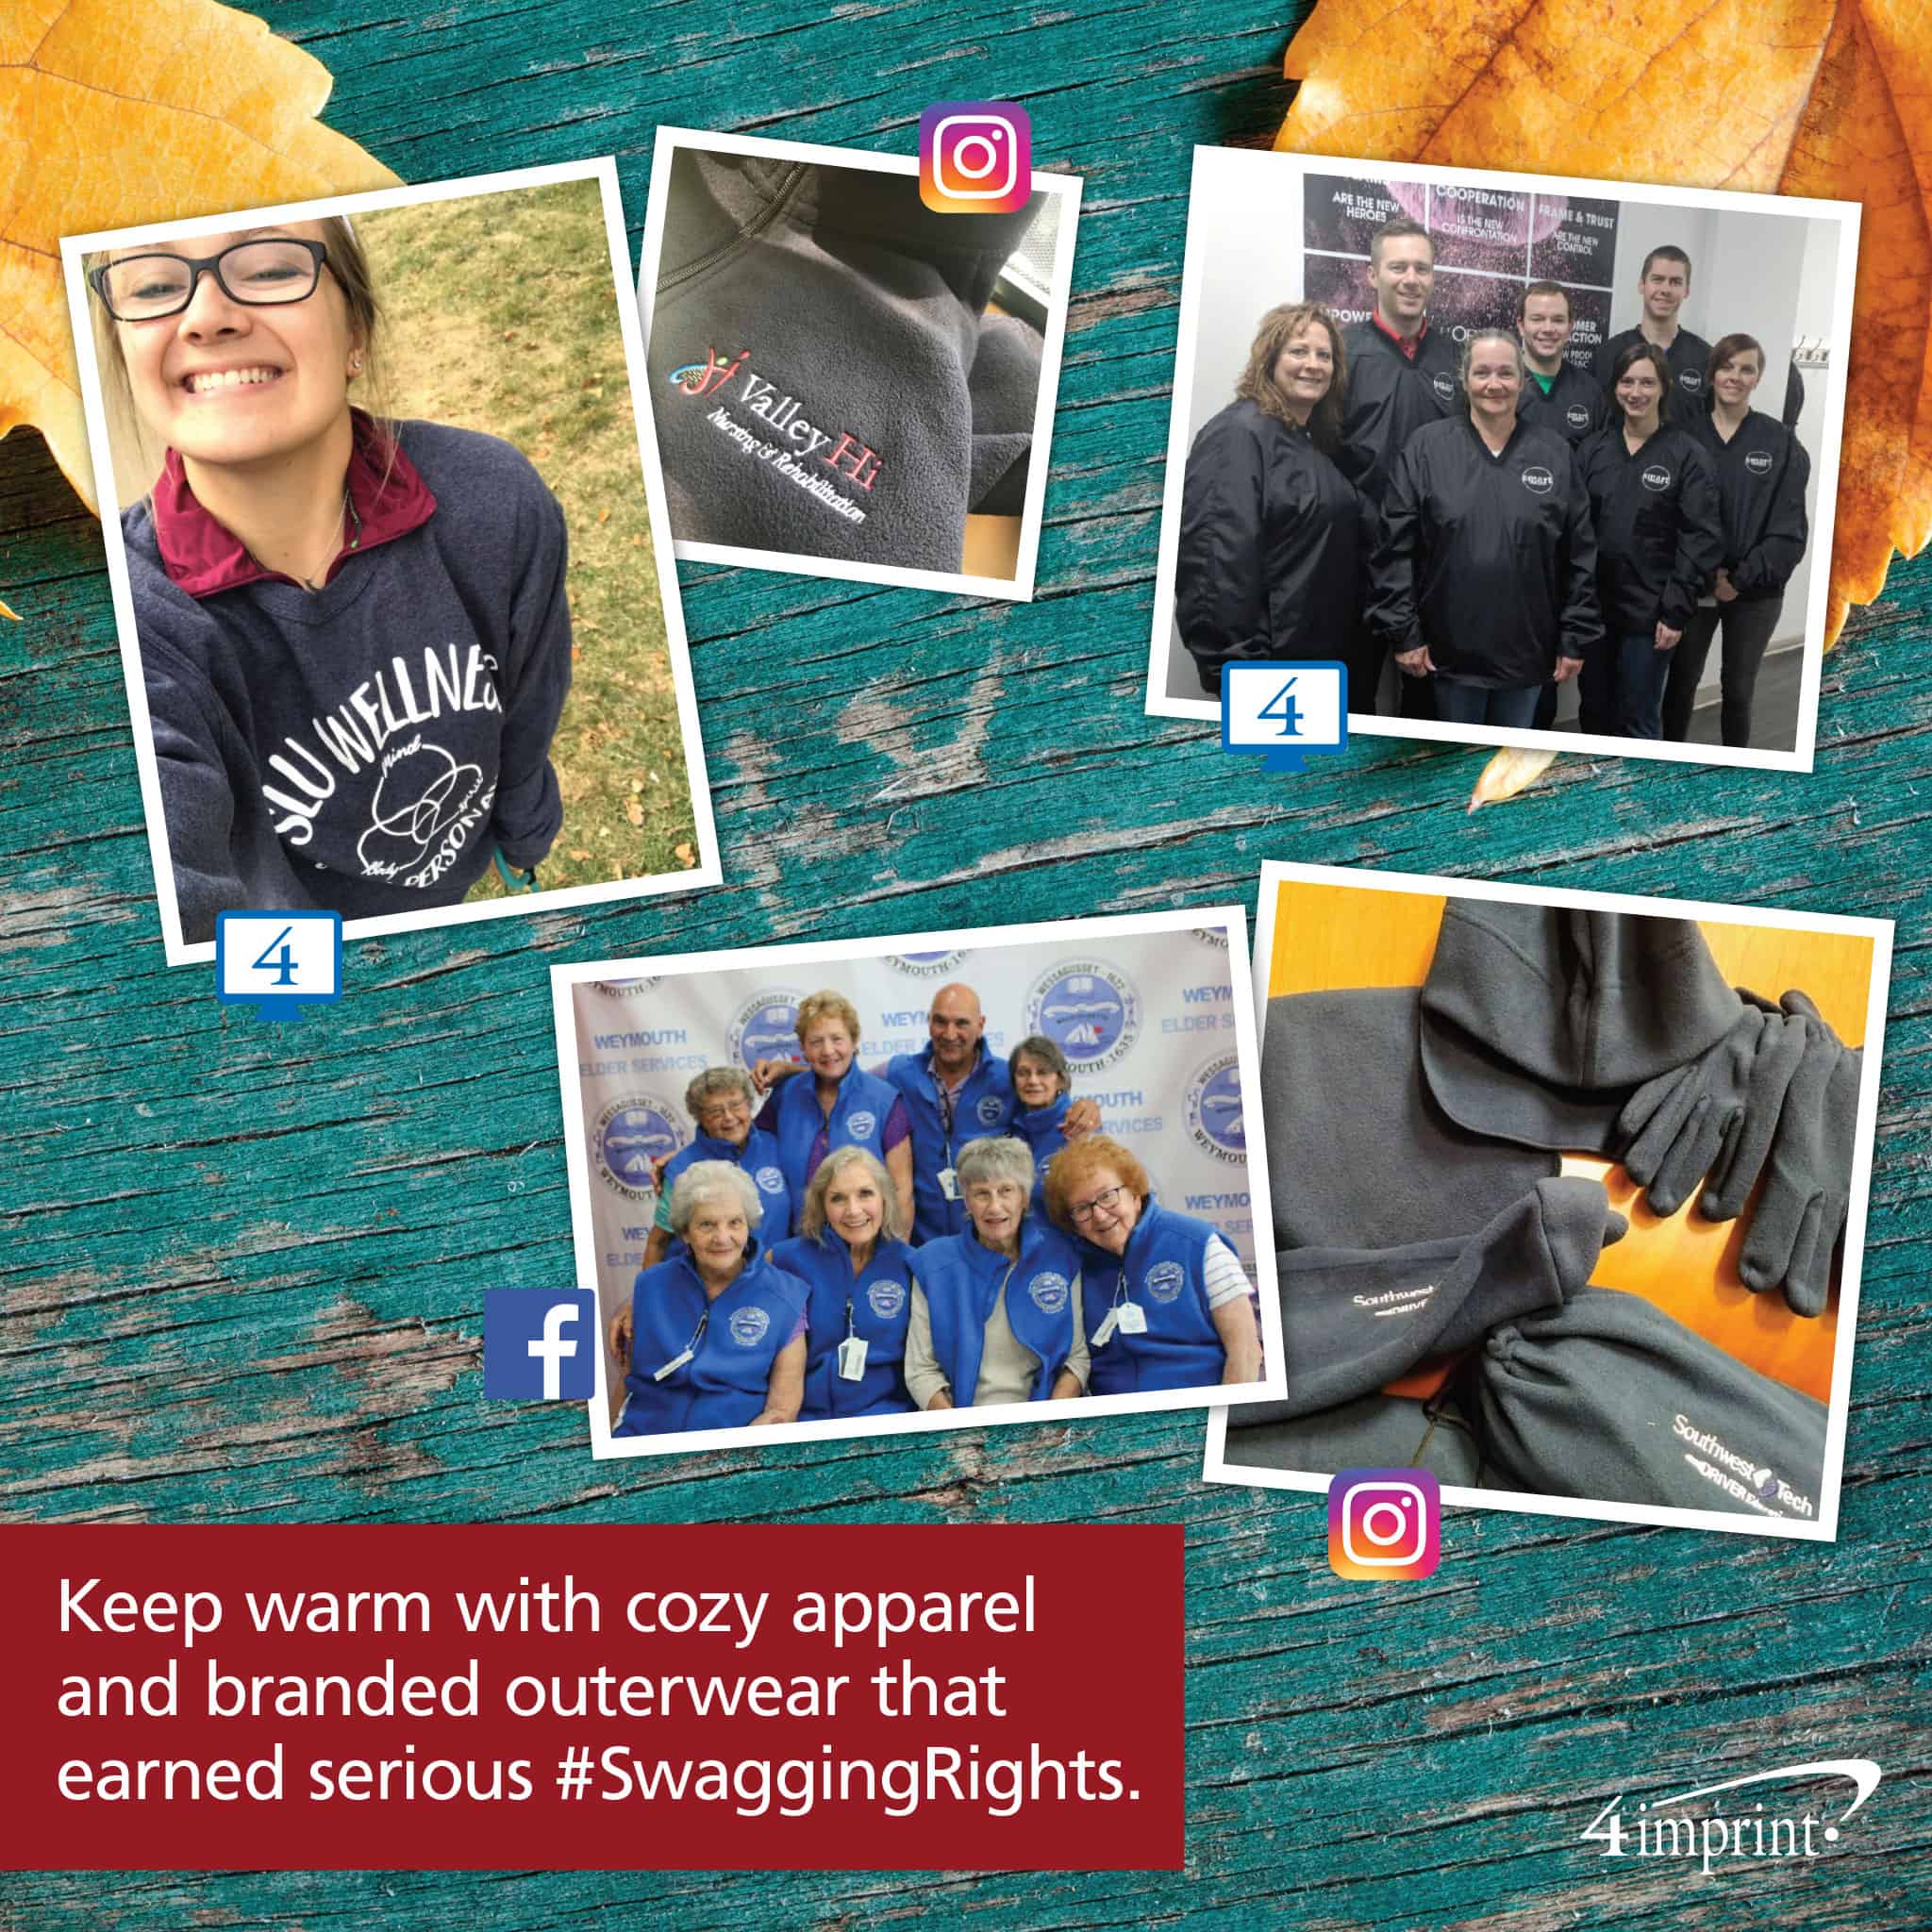 Keep warm with cozy apparel and branded outerwear that earned serious #SwaggingRights - photos posted on social media from 4imprint customers of promotional sweatshirts and other cozy apparel